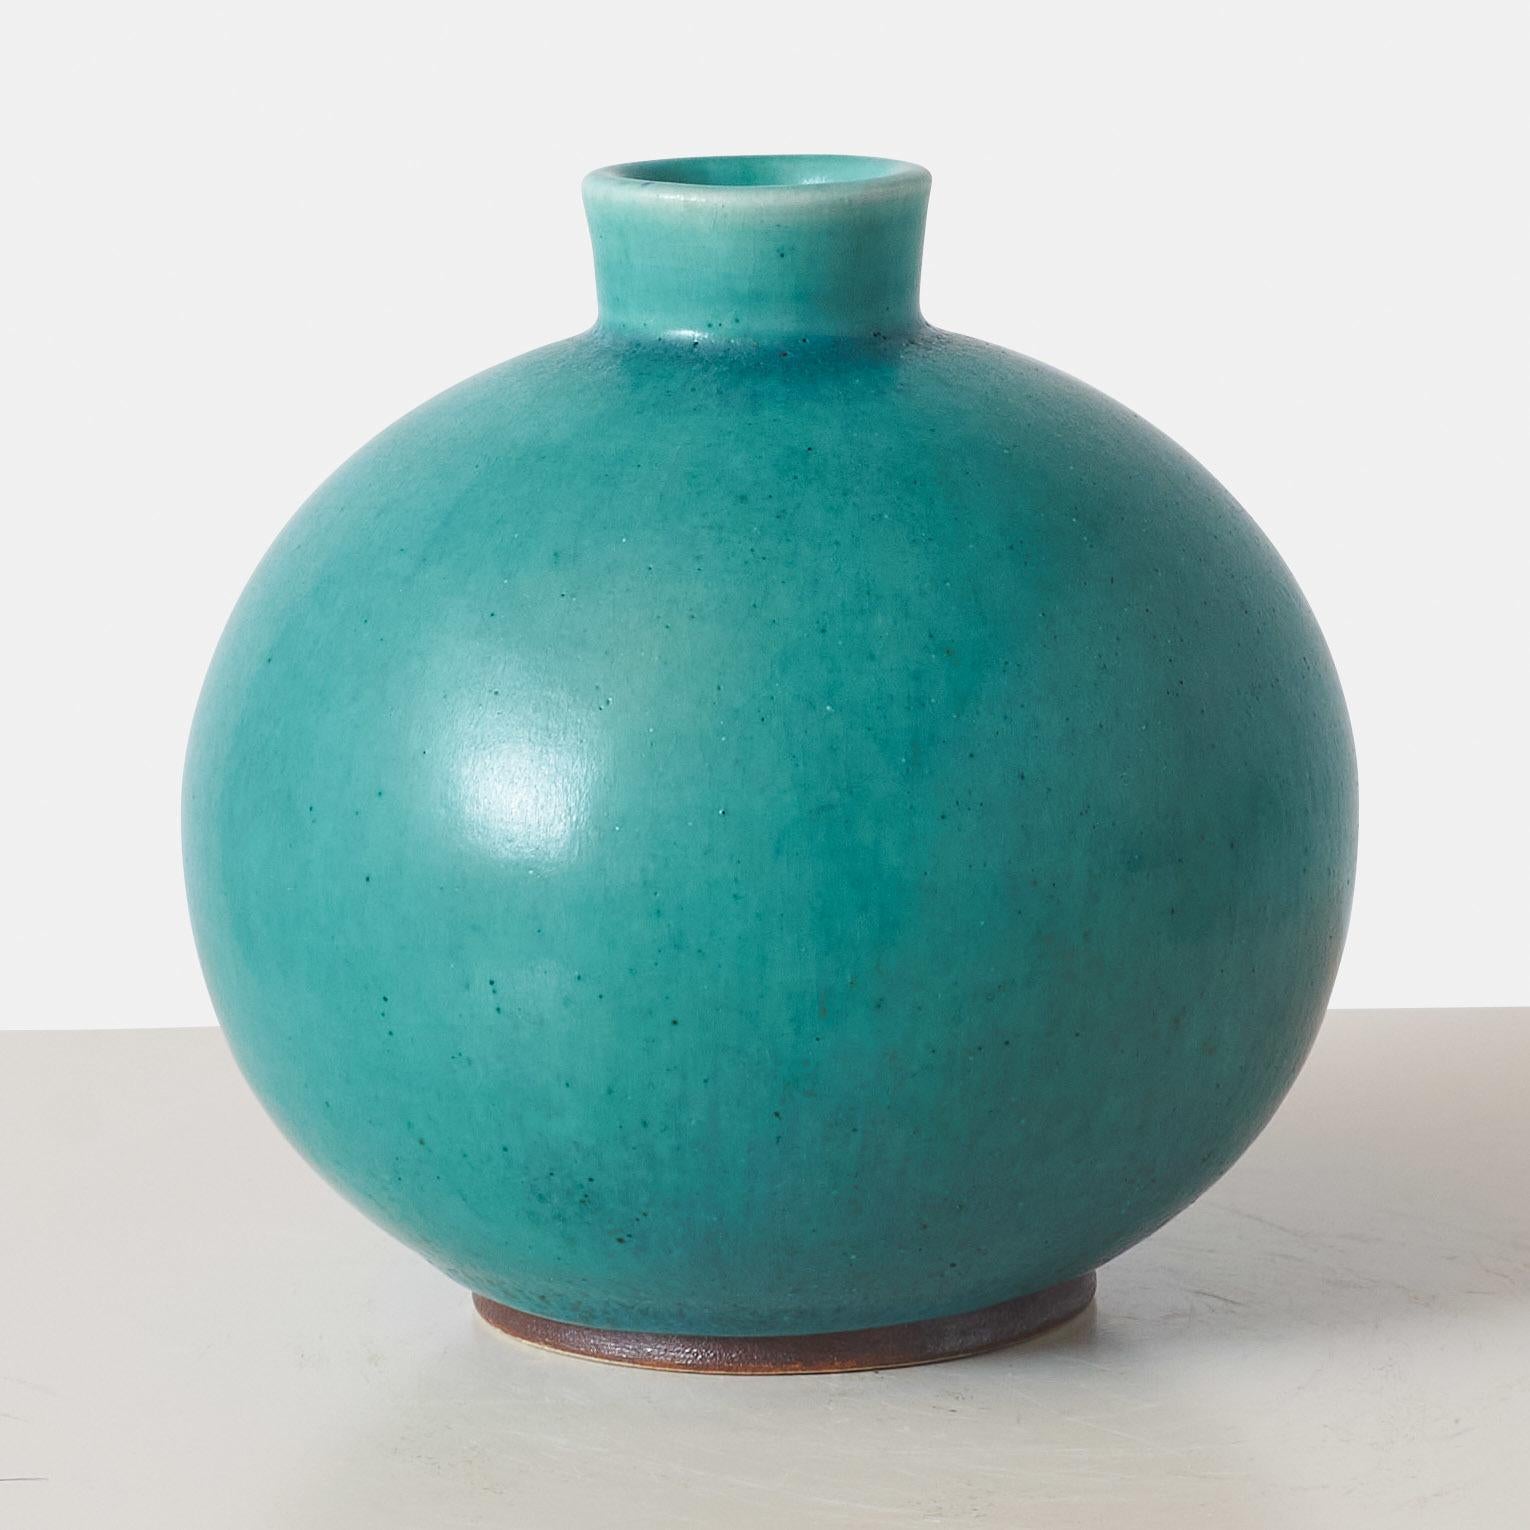 A footed spherical vase with an aquamarine hares fur glaze by Eva Stæhr Nielsen for Saxbo. Stamped with the Saxbo crown symbol, model number 85, and “SAXBO COPENHAGEN”.